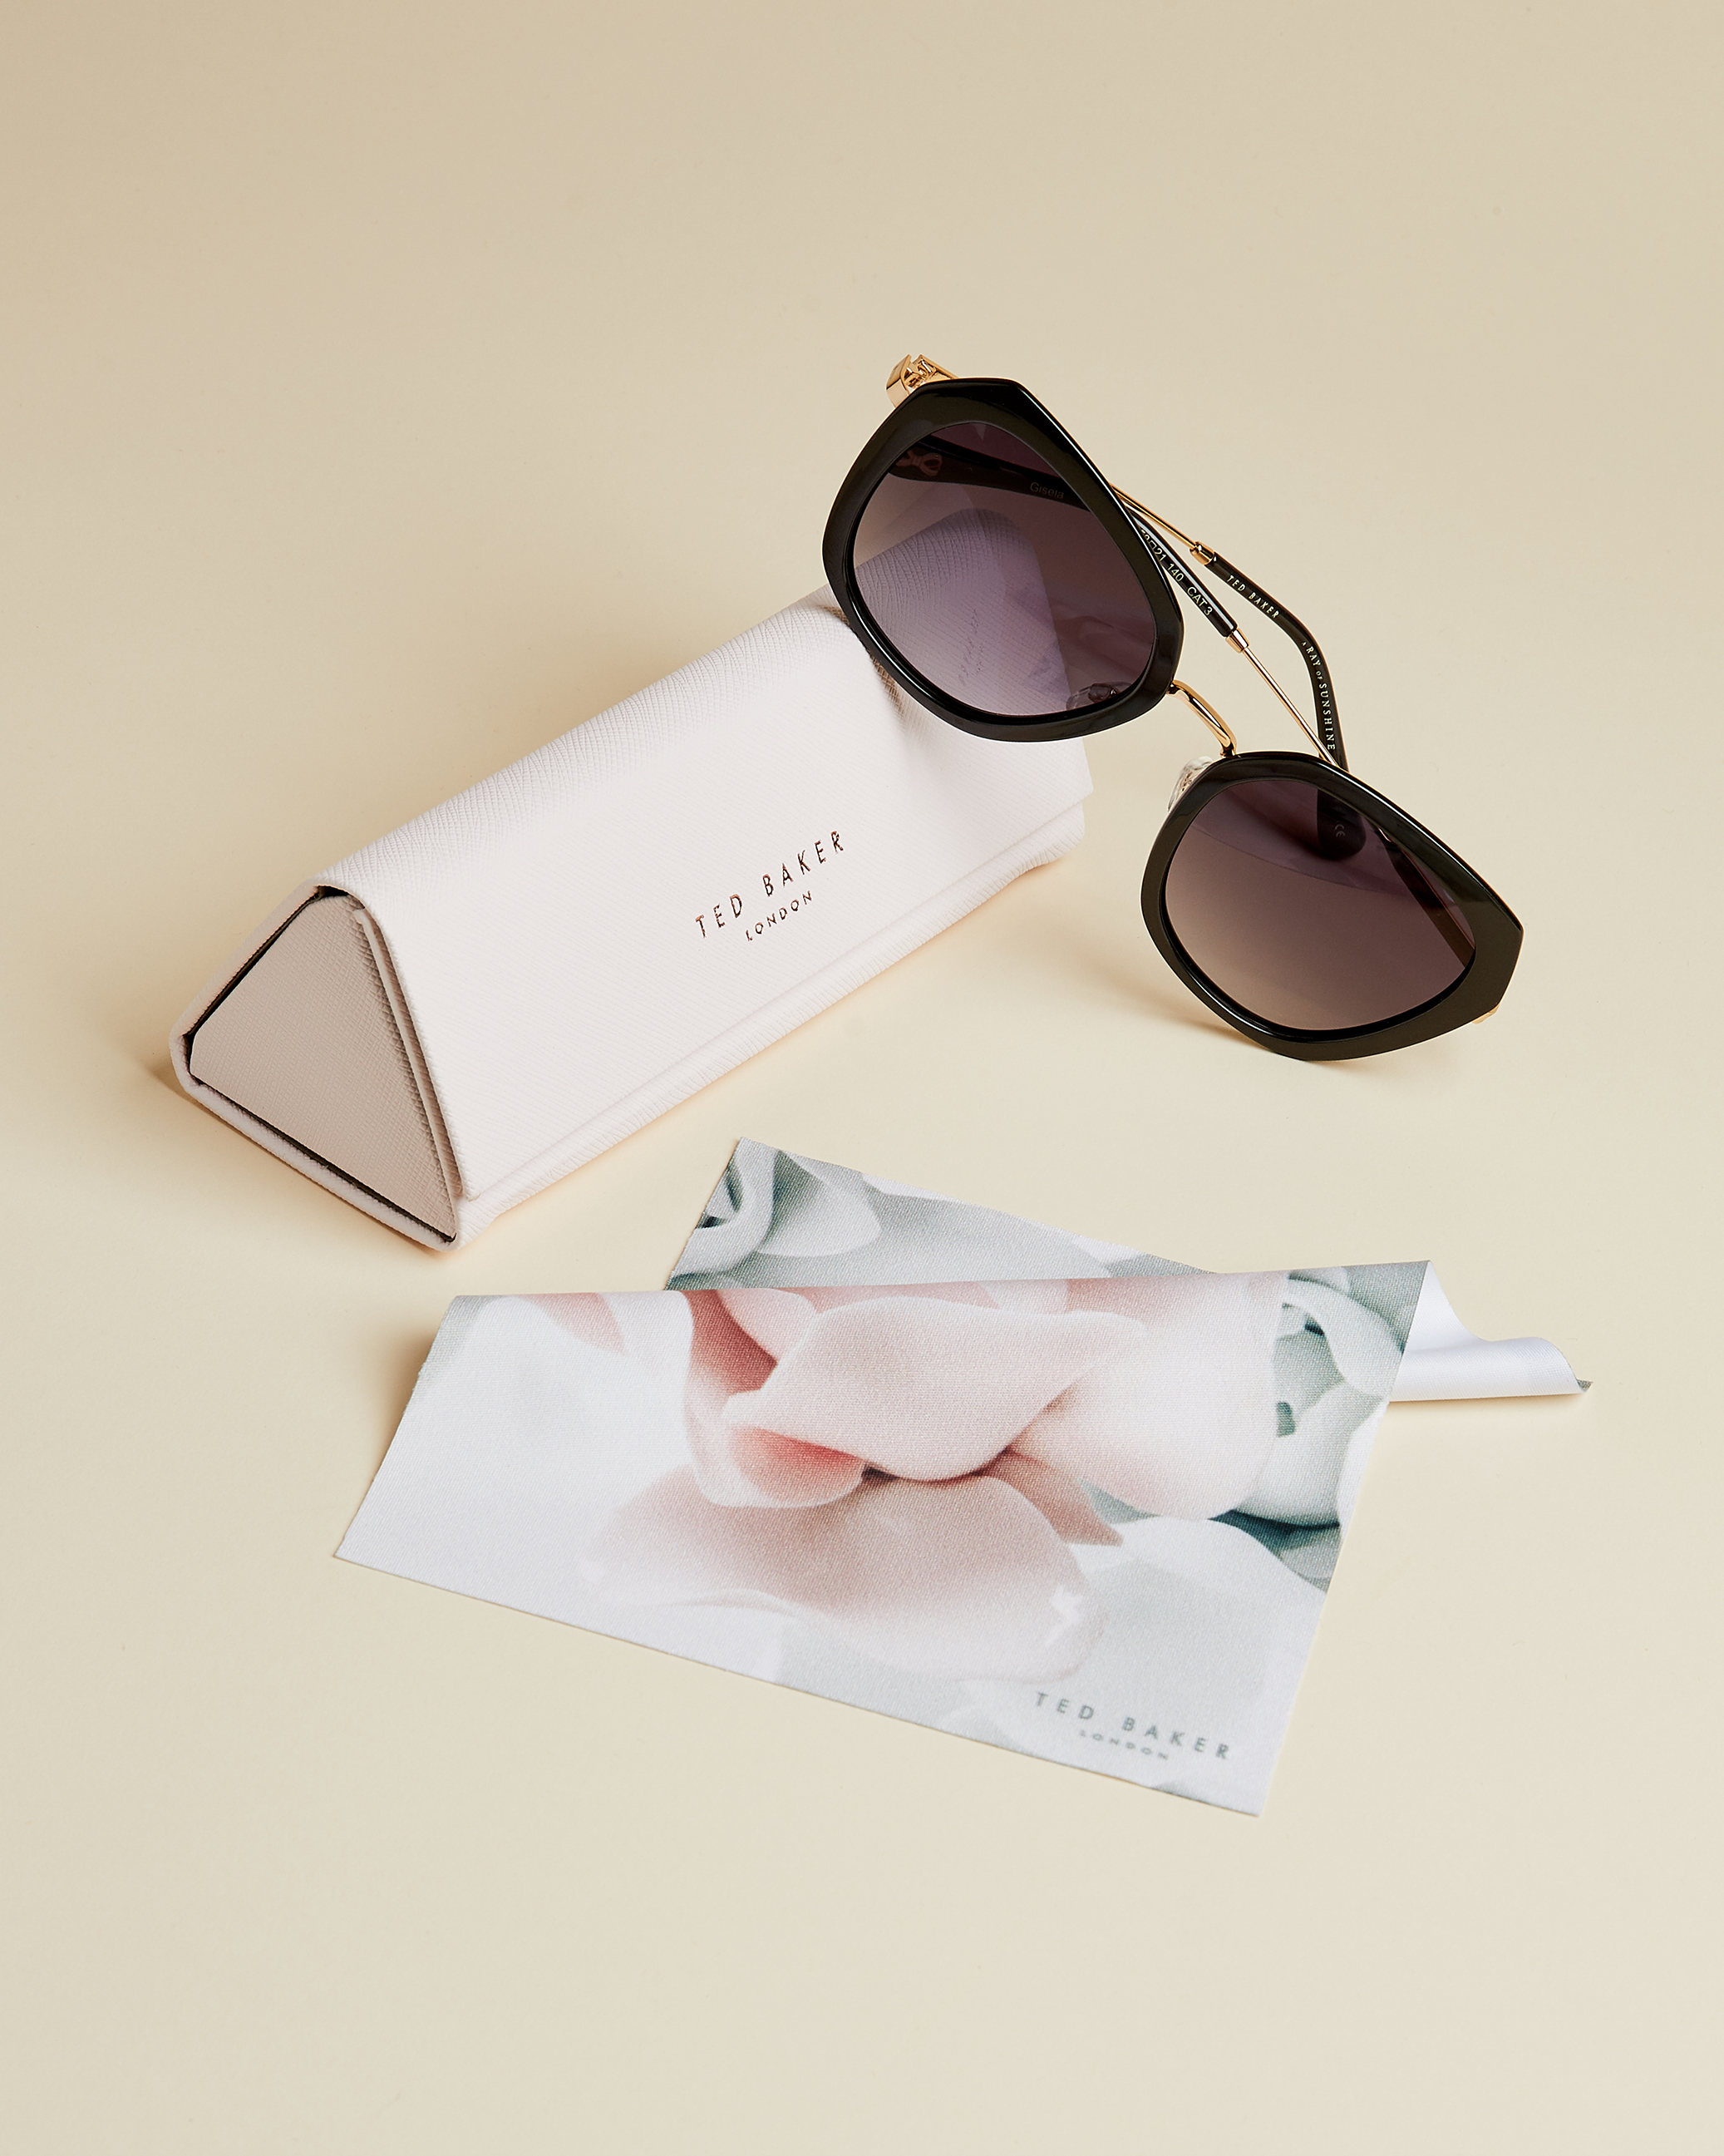 ted baker sunglasses a ray of sunshine